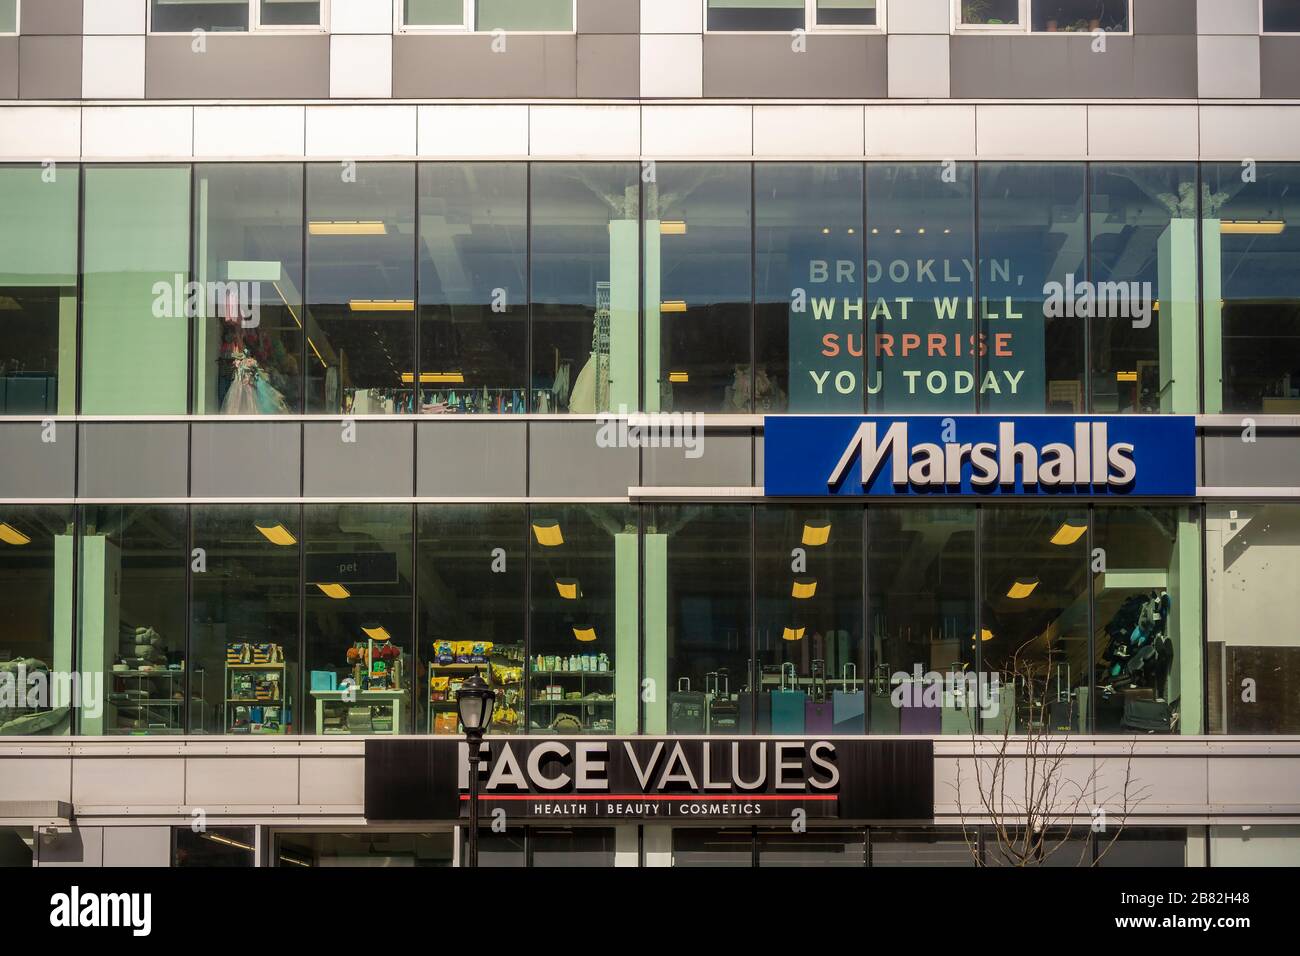 Marshalls store in Downtown Brooklyn in New York on Saturday, March 14, 2020. Marshalls is a brand of the TJX Companies, parent of Marshalls, T. J. Maxx, HomeGoods and other brands. (© Richard B. Levine) Stock Photo